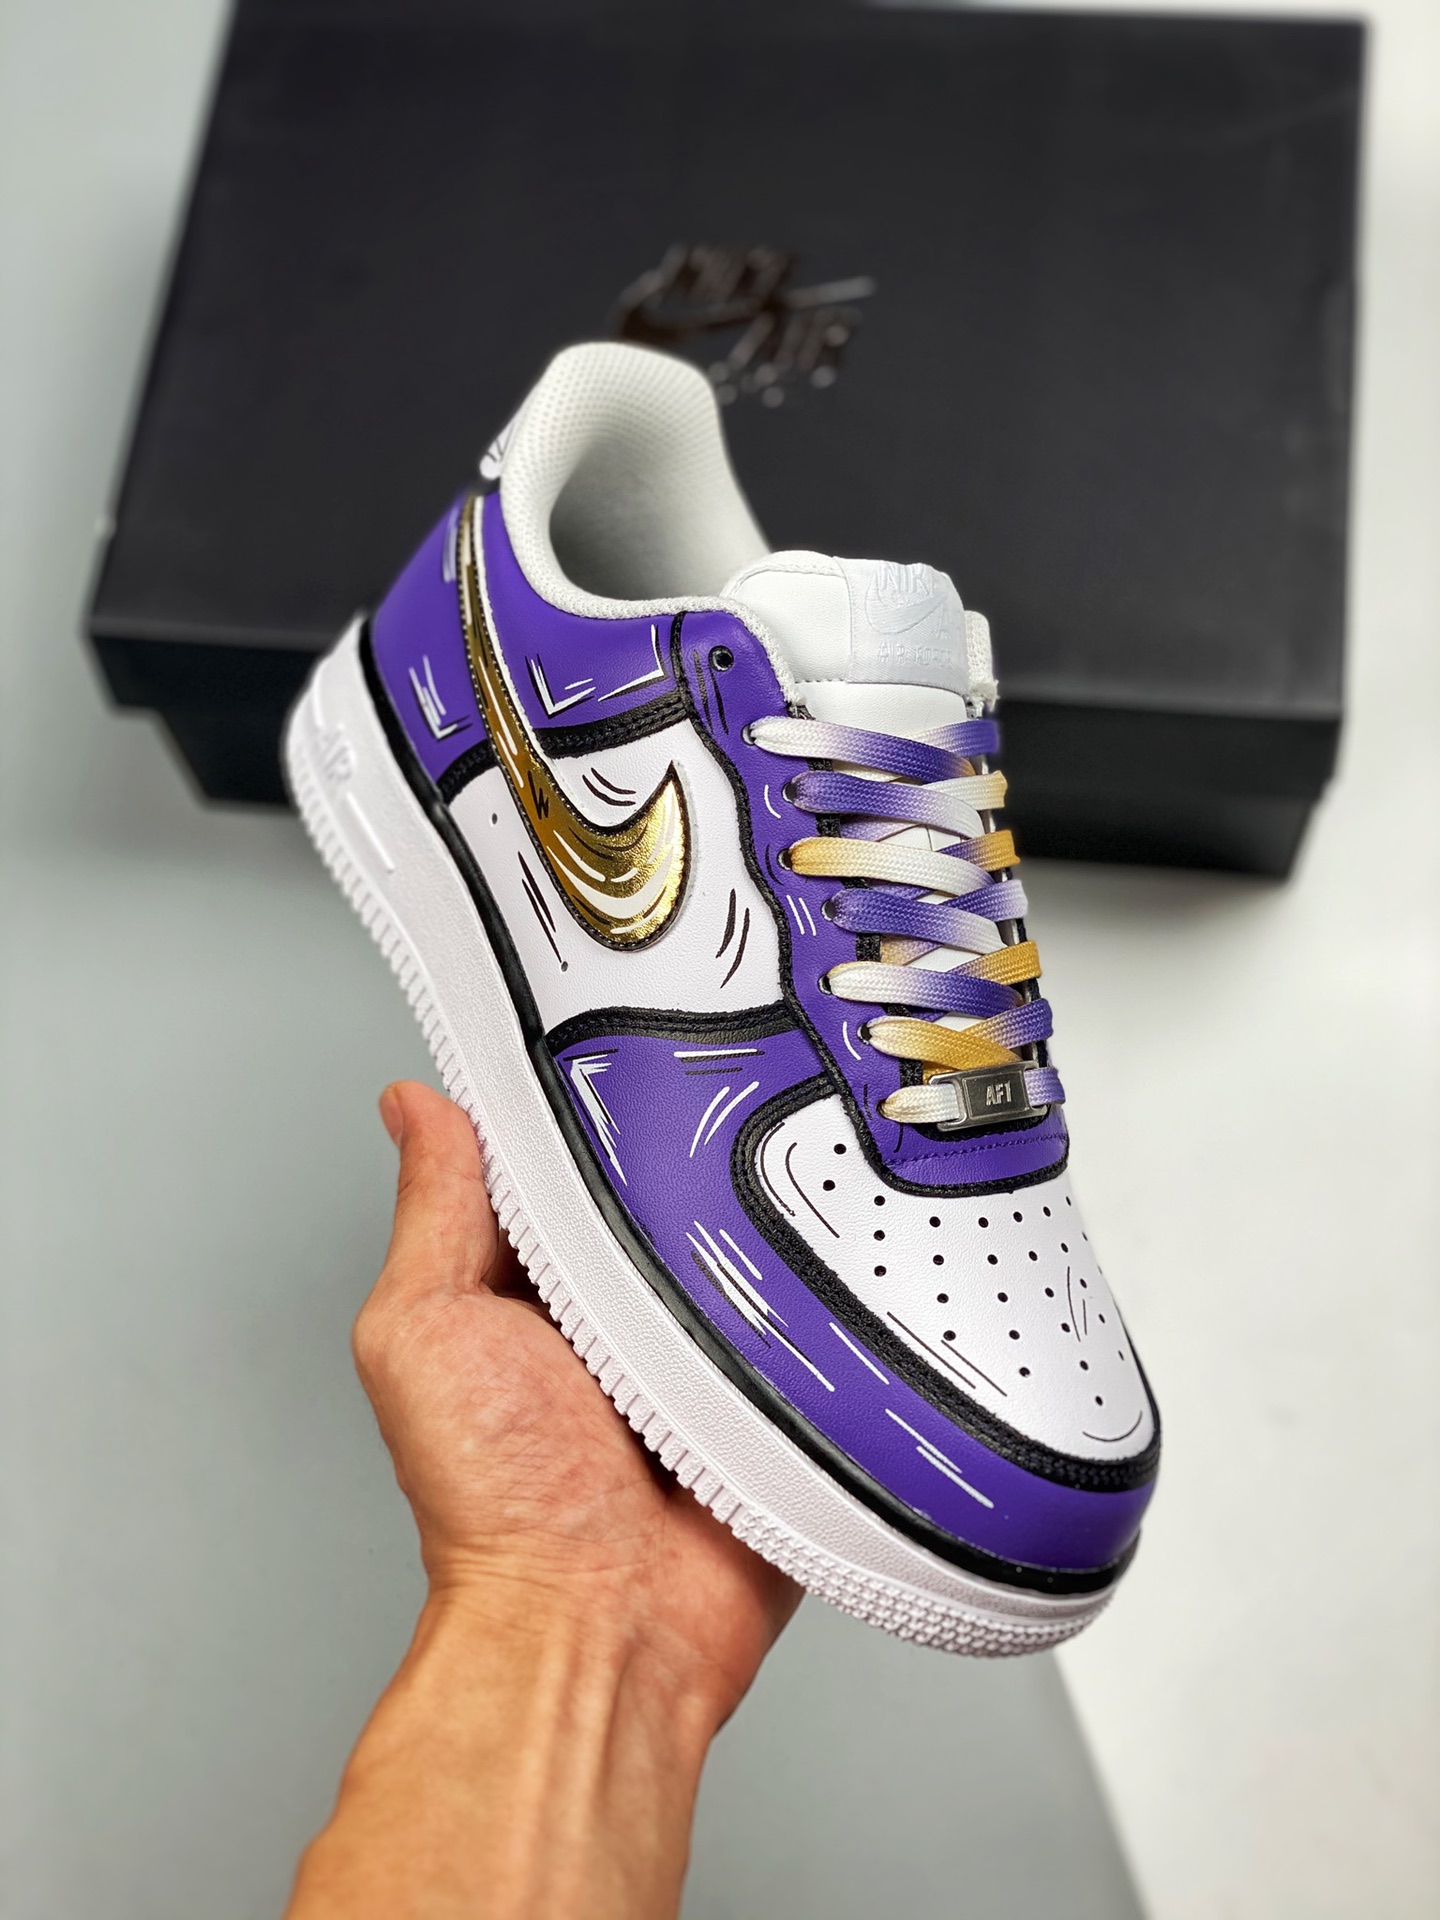 Custom Nike Air AF Force 1 Low "Lakers" Purple White Shoes